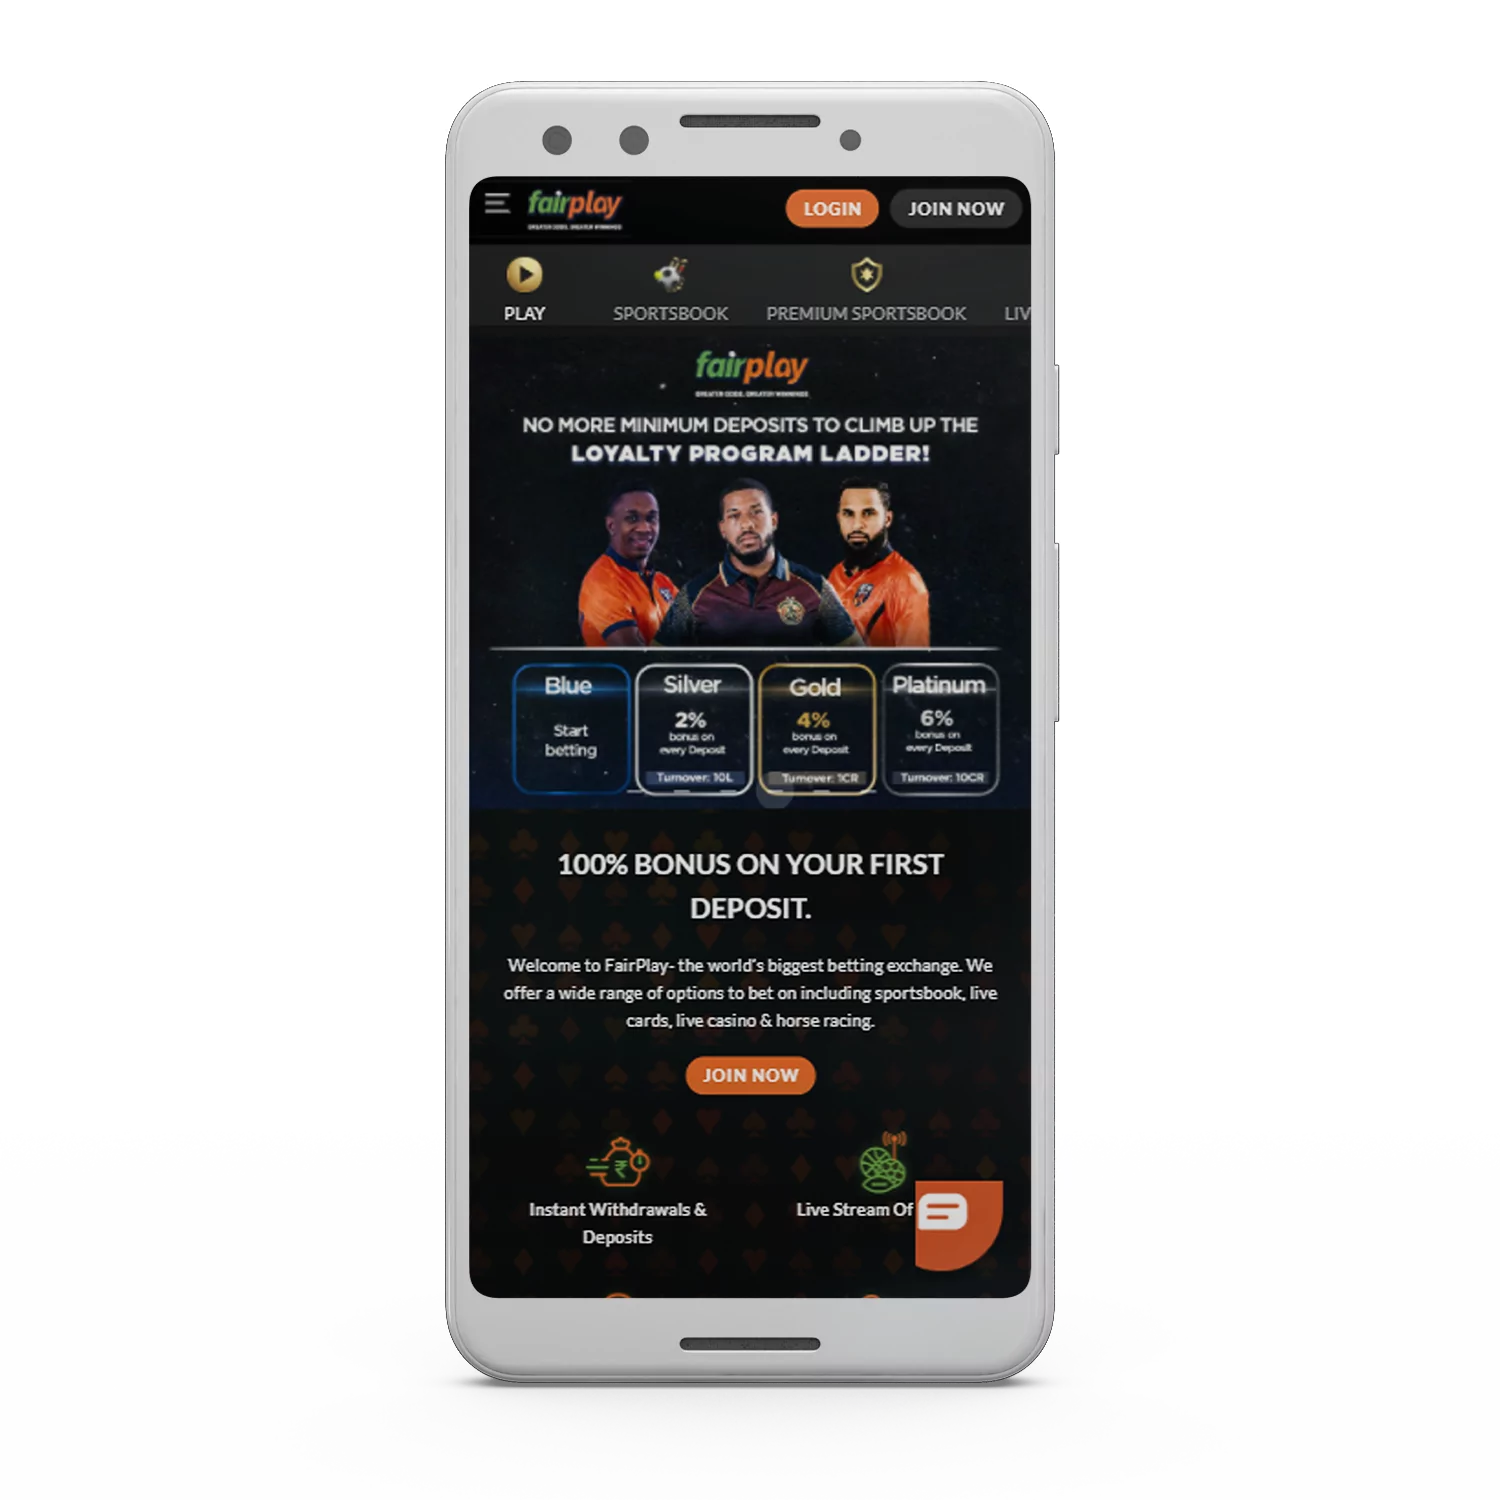 The Fairplay app supports online cricket betting.